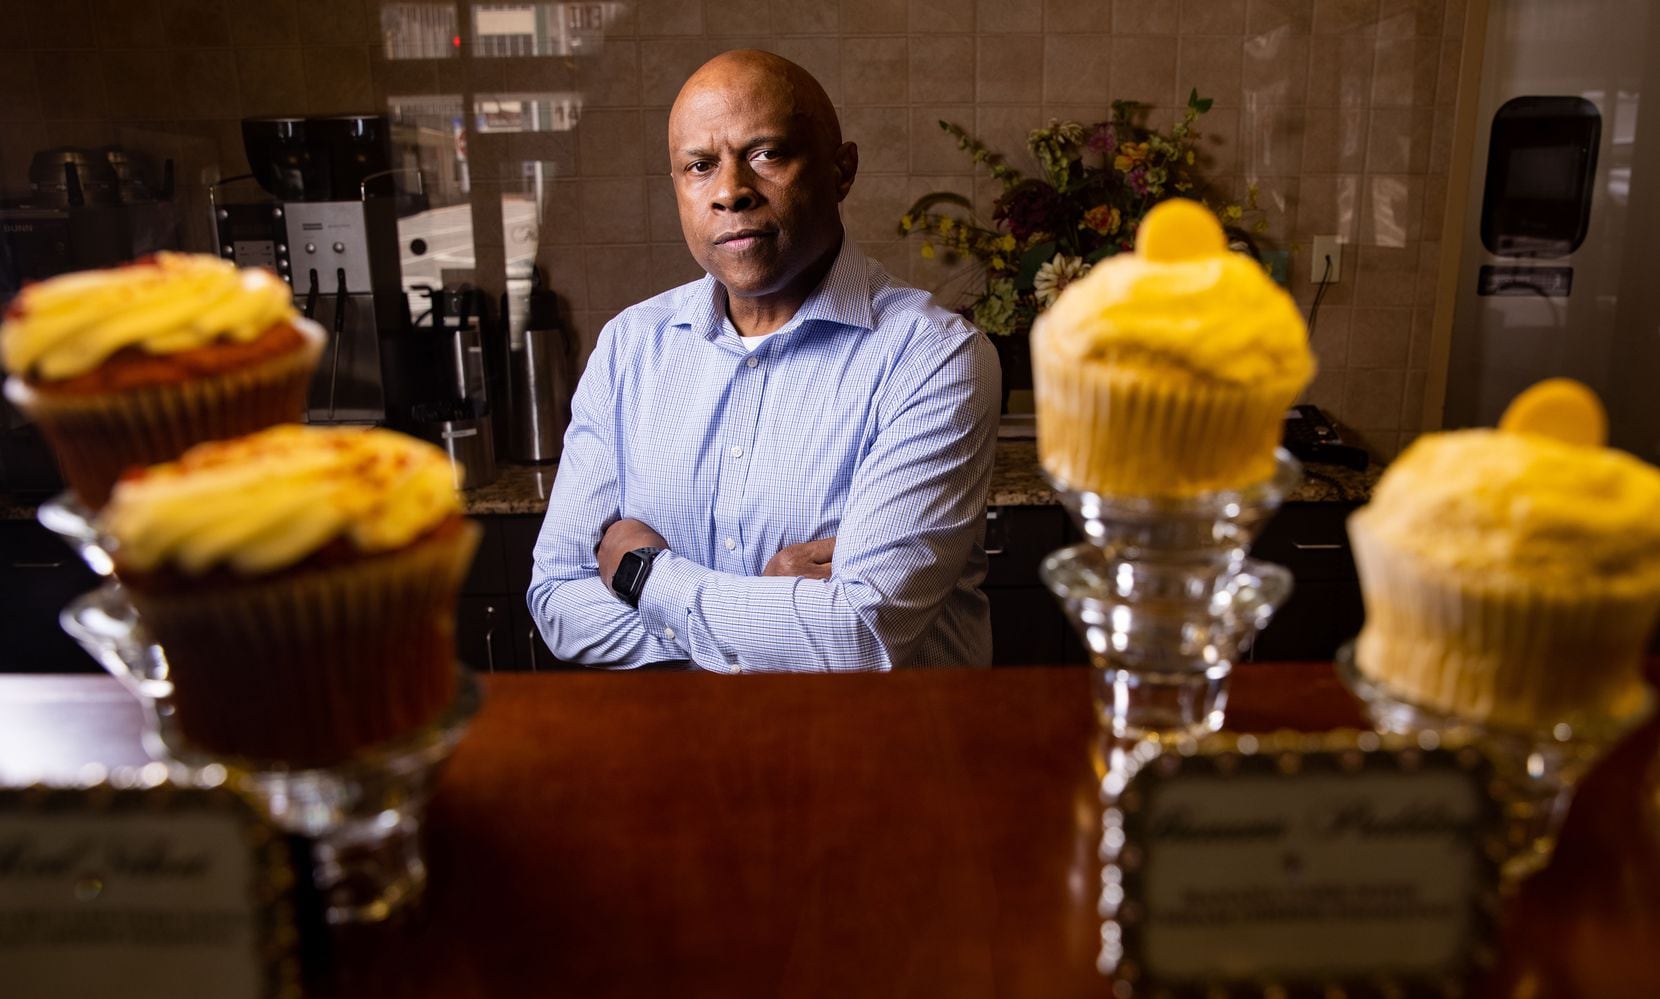 Owner Keith Fluellen posed behind the display counter of Fluellen Cupcakes on May 5 in Dallas. Fluellen Cupcakes, a Black-owned small business, has had to downsize during the pandemic to survive, with Fluellen having to take over chef duties